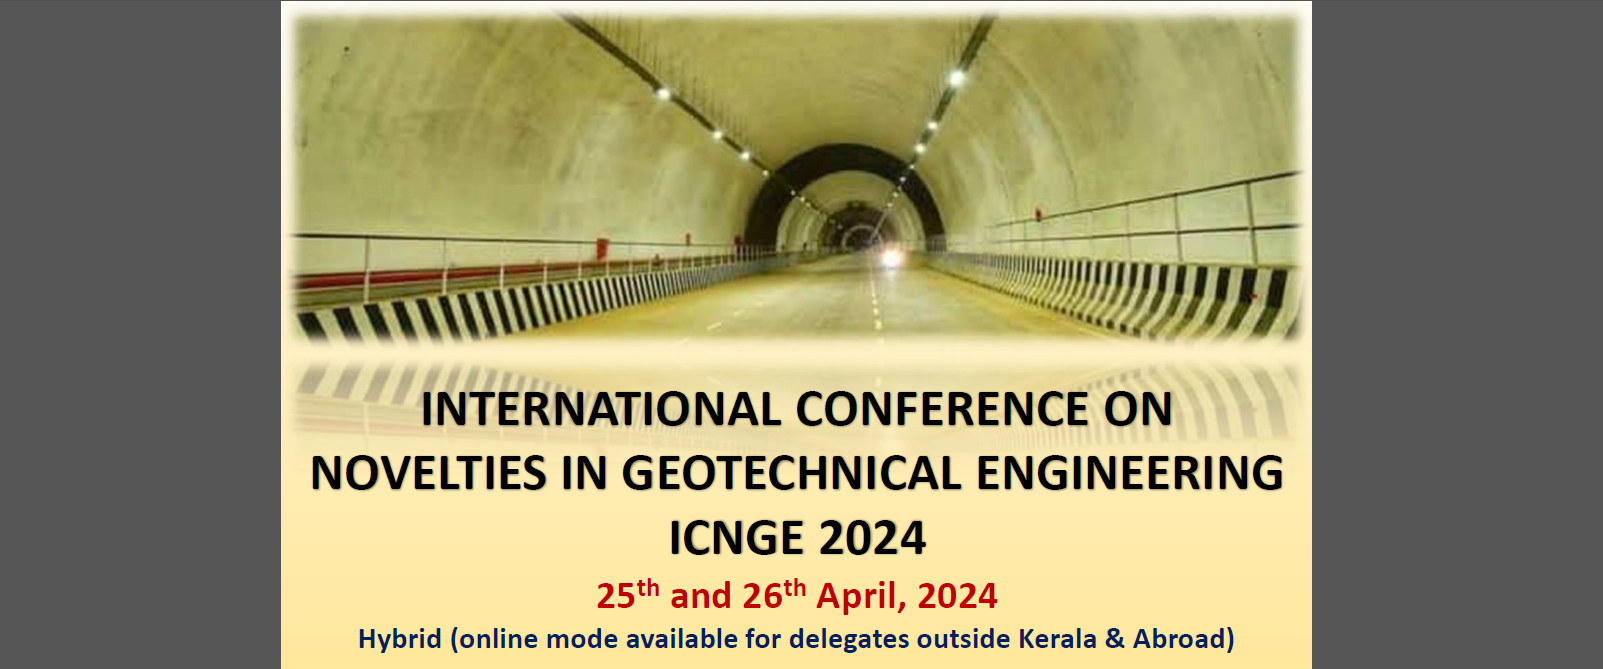 International Conference on Novelties in Geotechnical Engineering